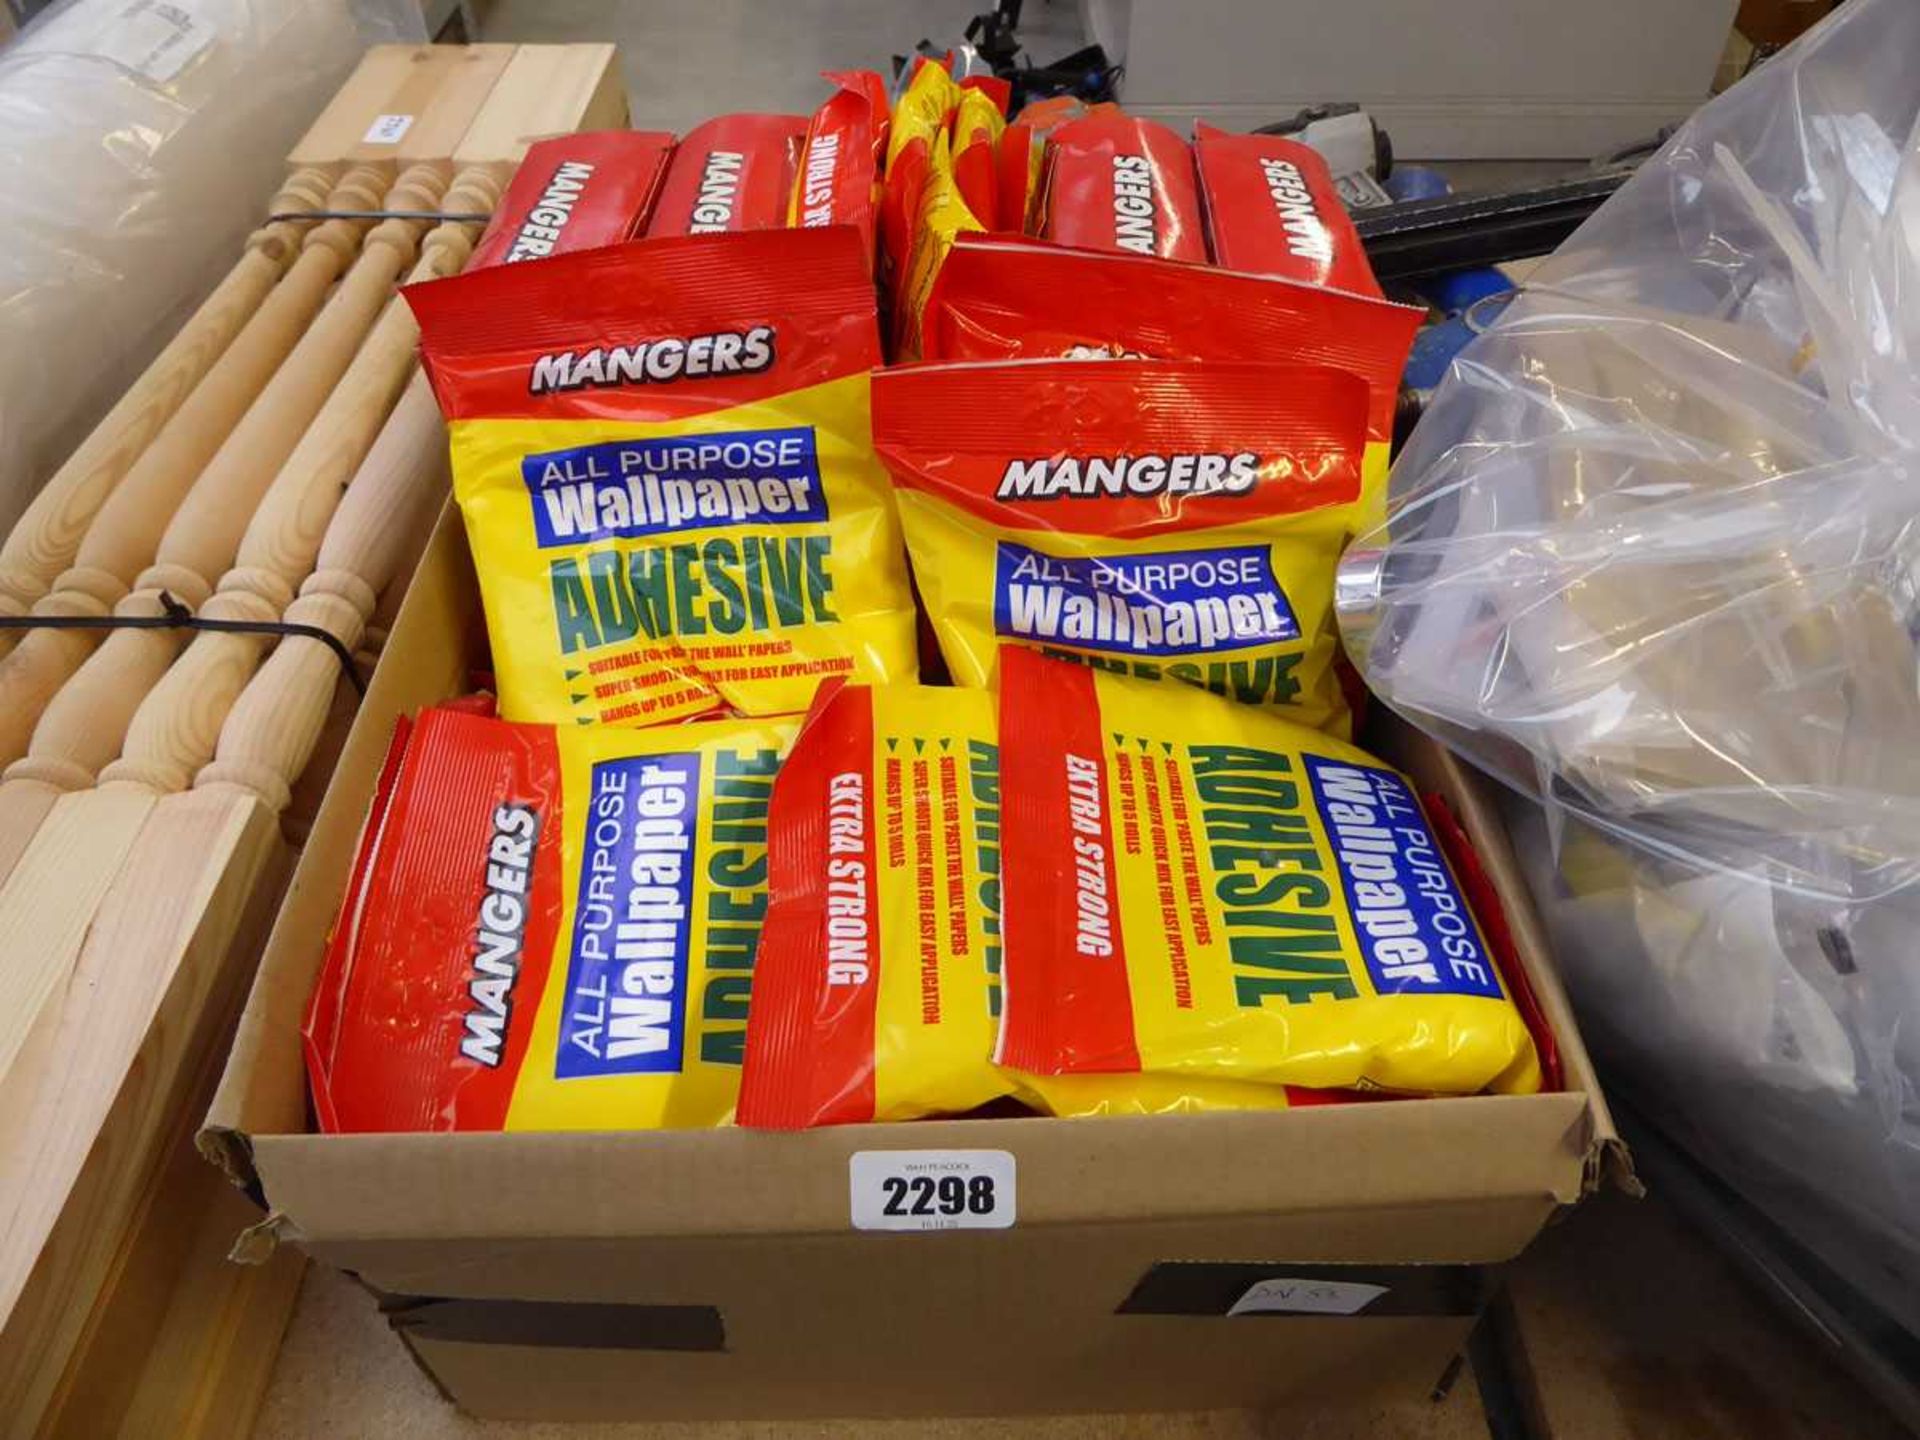 Box containing Mangers all purpose wallpaper paste